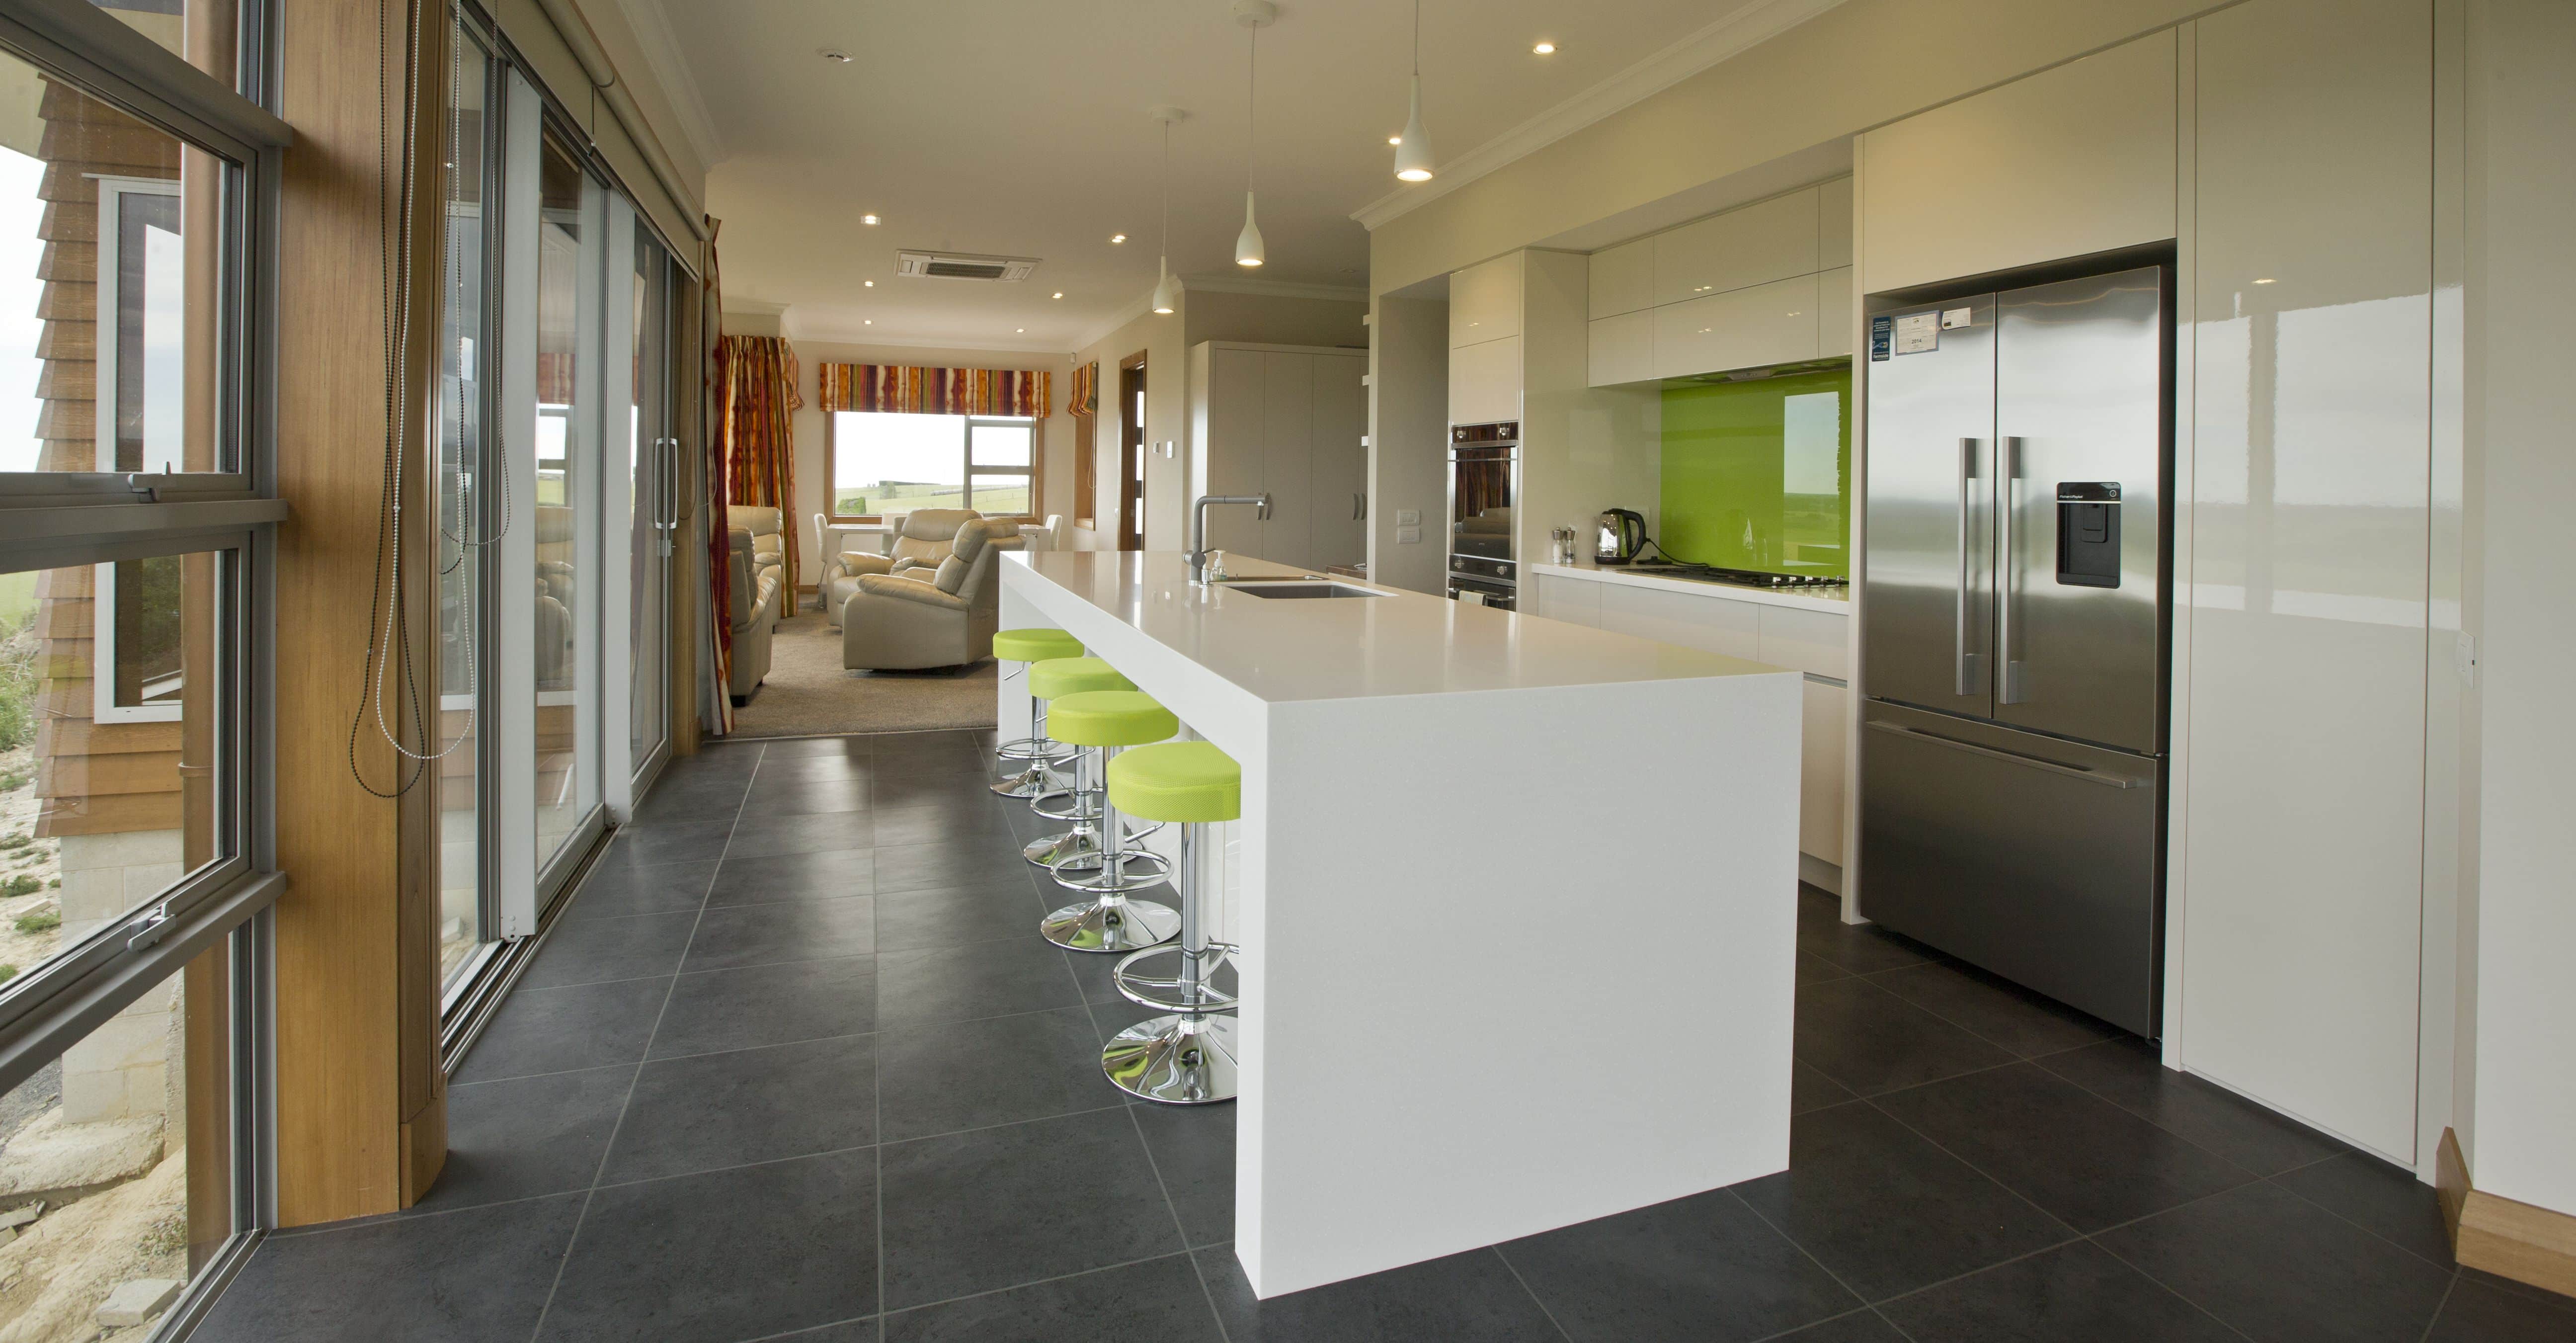  A lime green splash back matching the bar stools increases the pop of colour from the living room